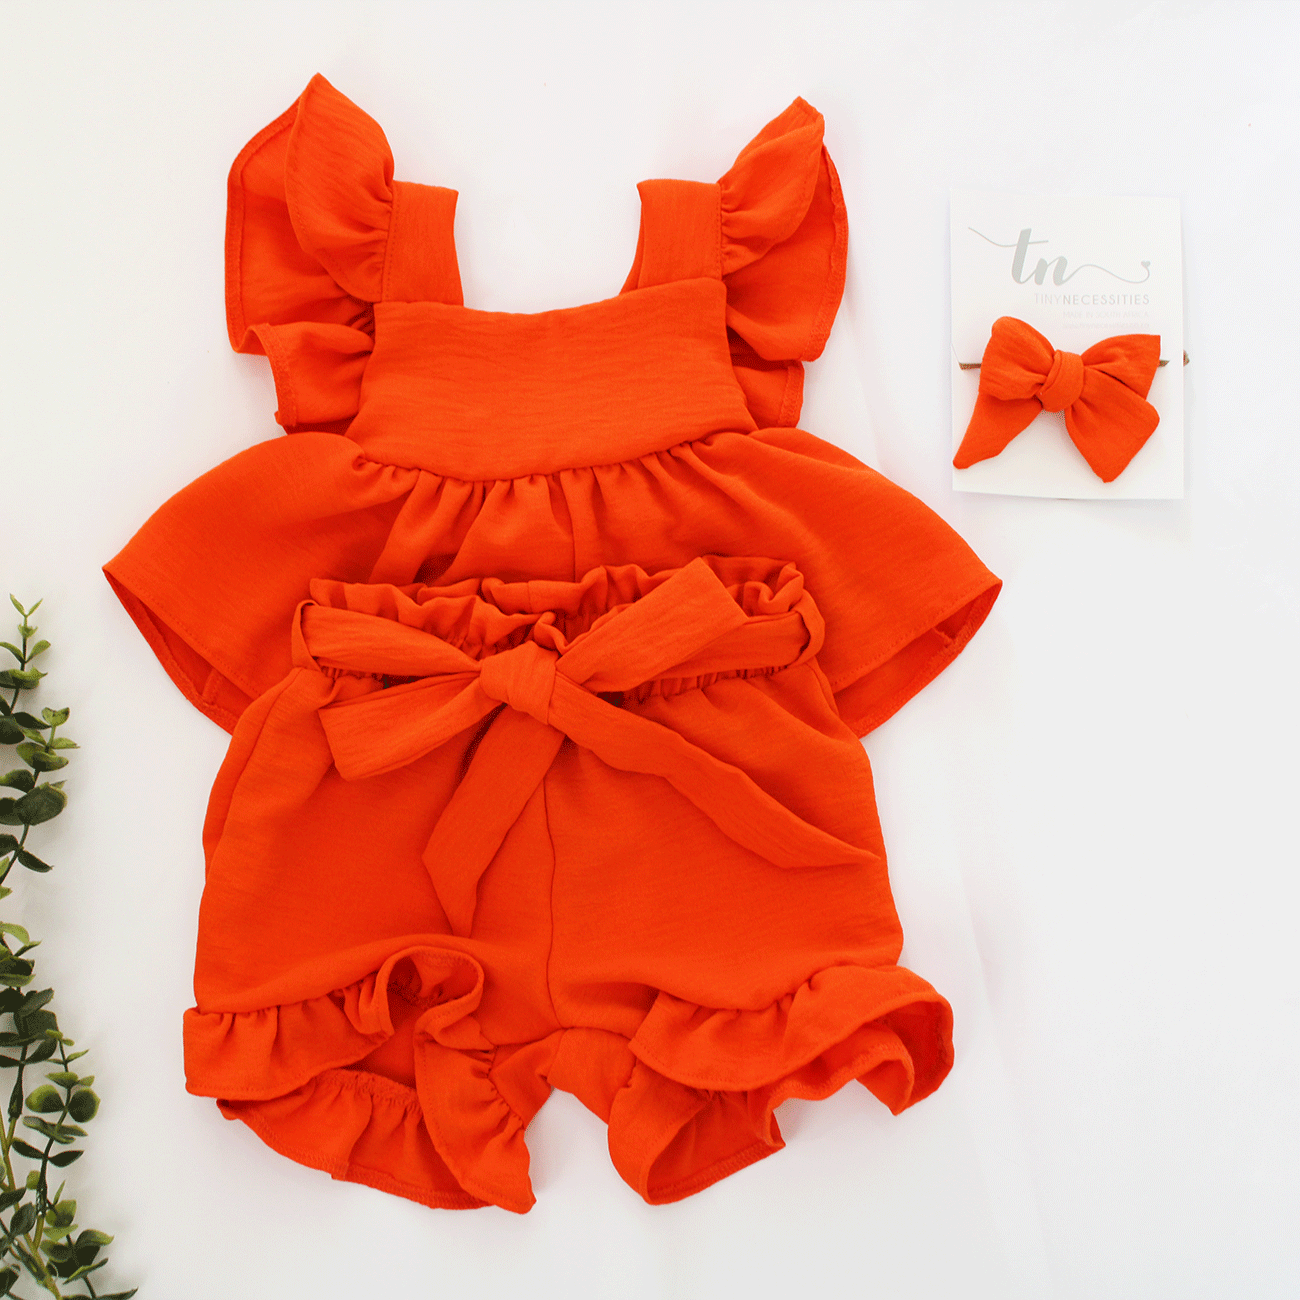 Milly Top - Orange (bottom and headband sold separately)